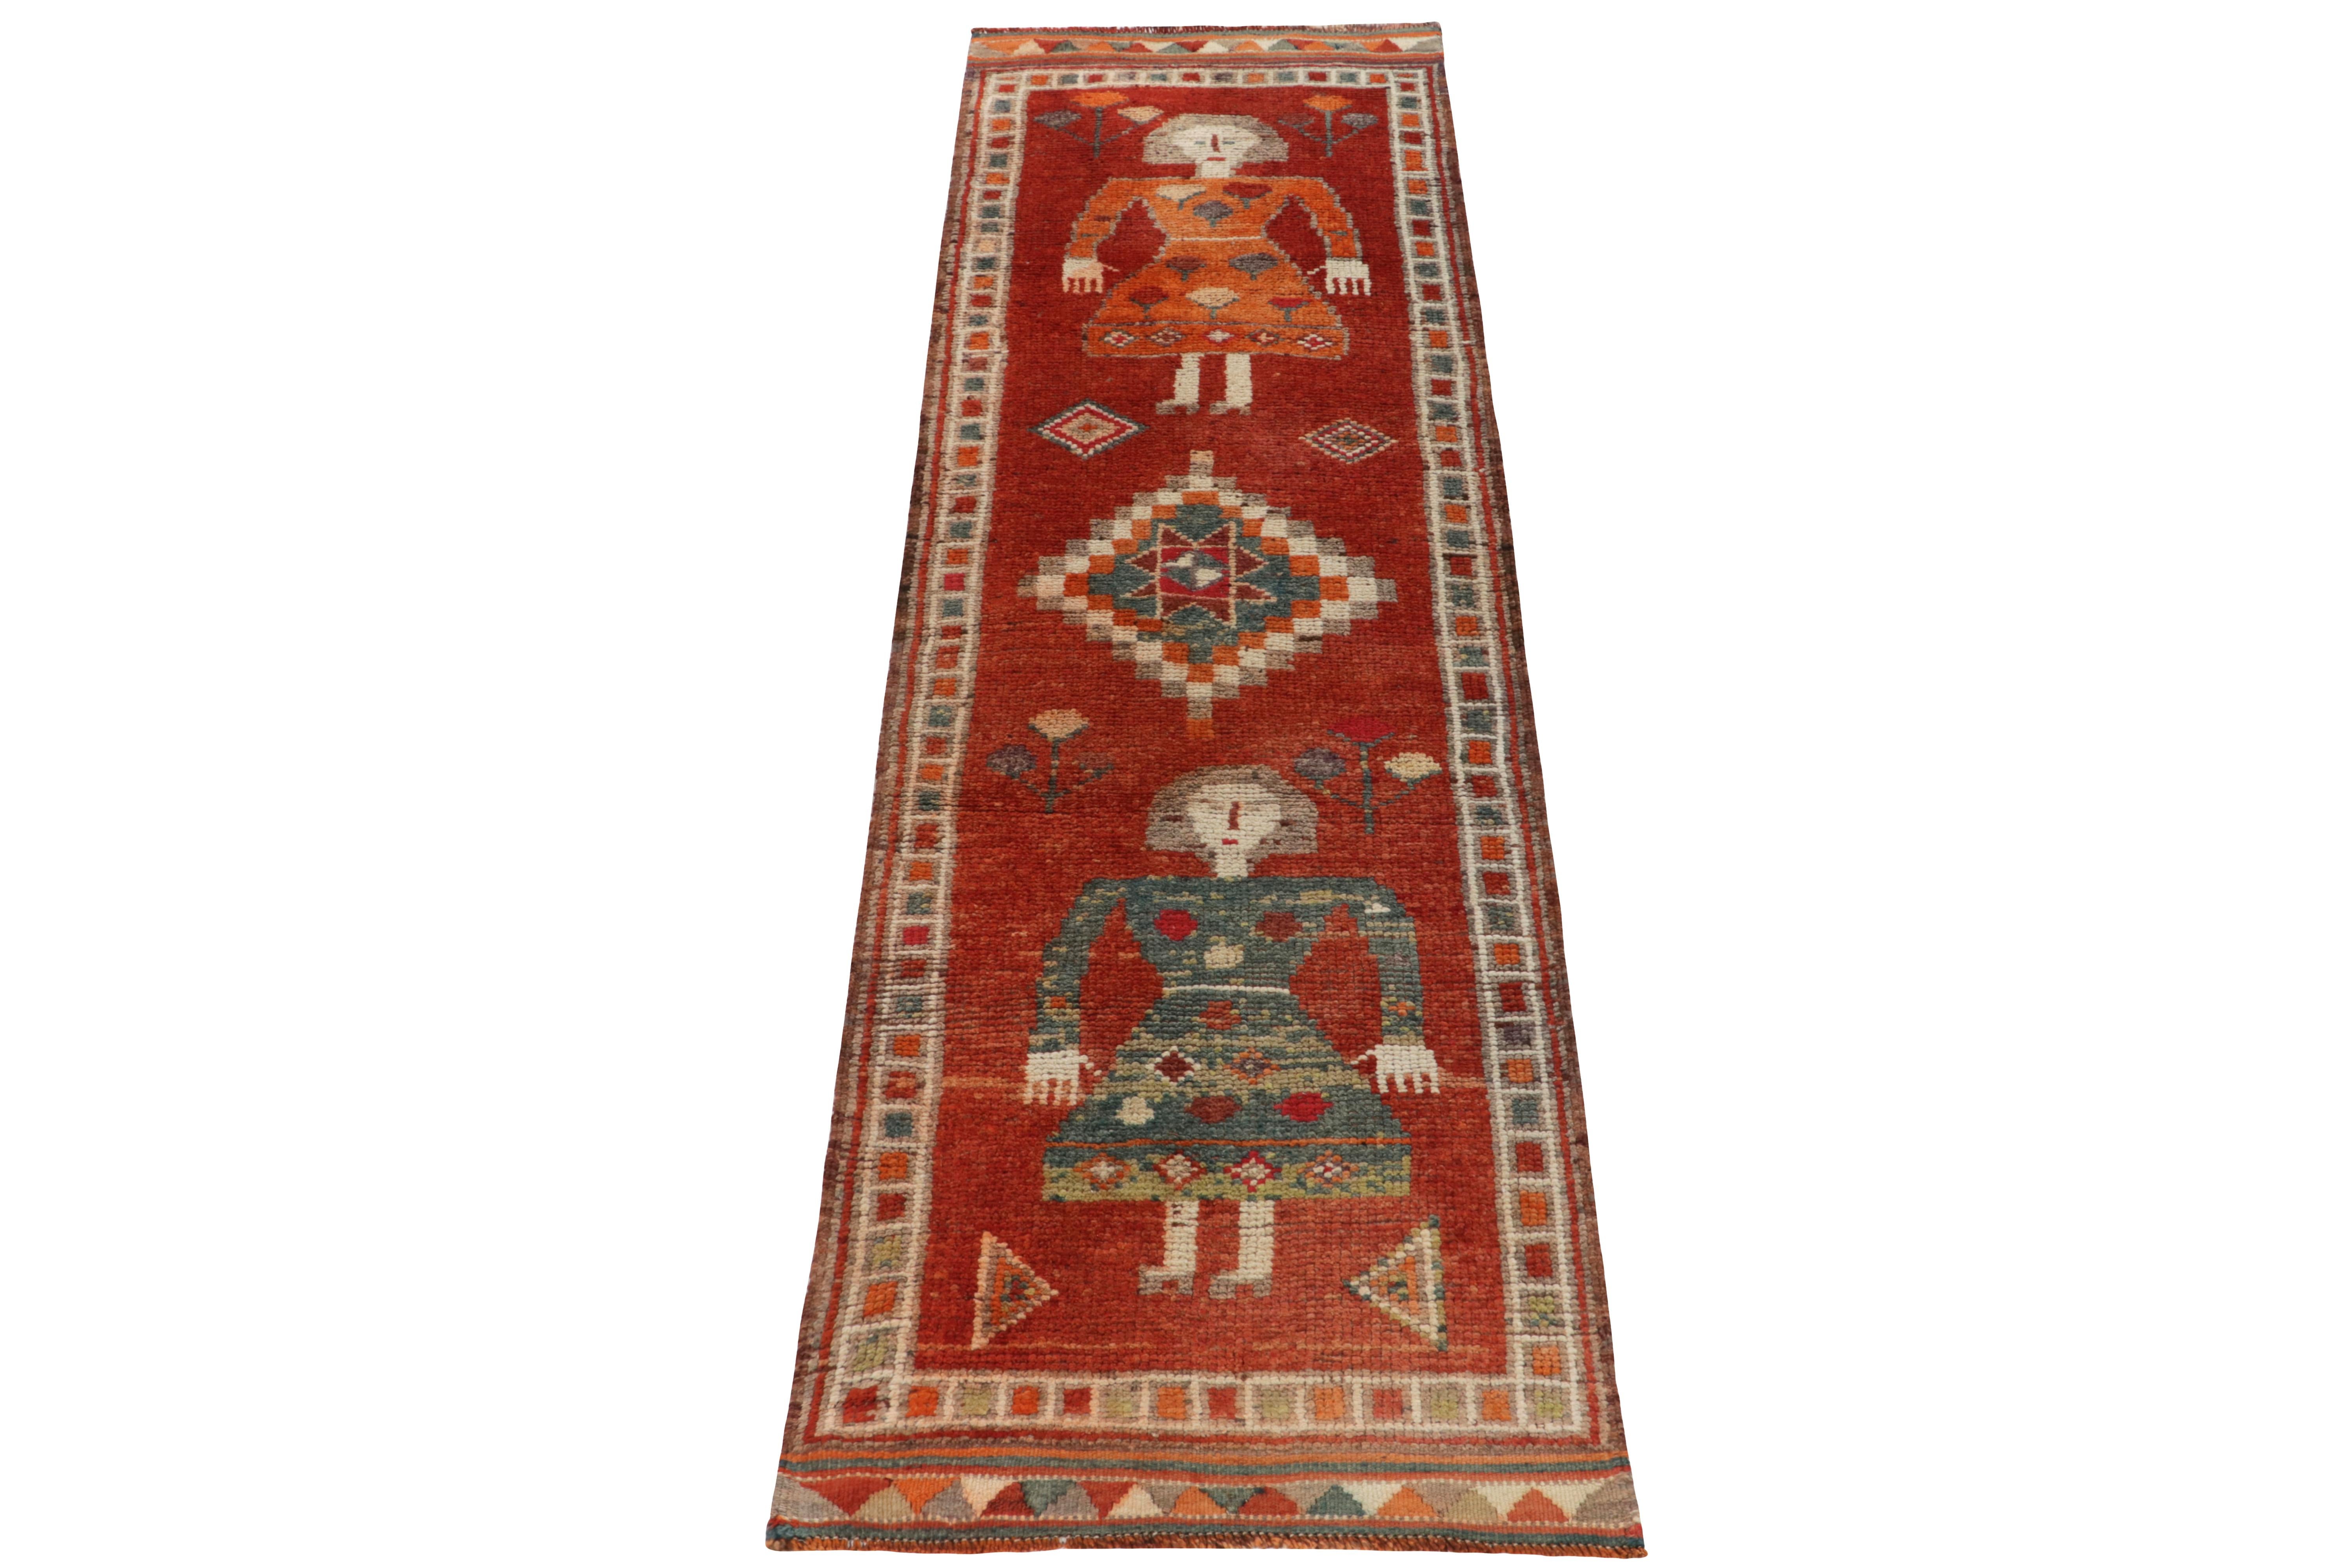 Hand-knotted in wool, a 3x11 runner from Rug & Kilim’s latest curation of rare tribal acquisitions. Originating from Turkey circa 1950-1960, a pictorial rug as rare in design as it is versatile in large size. 

The piece enjoys pictorials & tribal